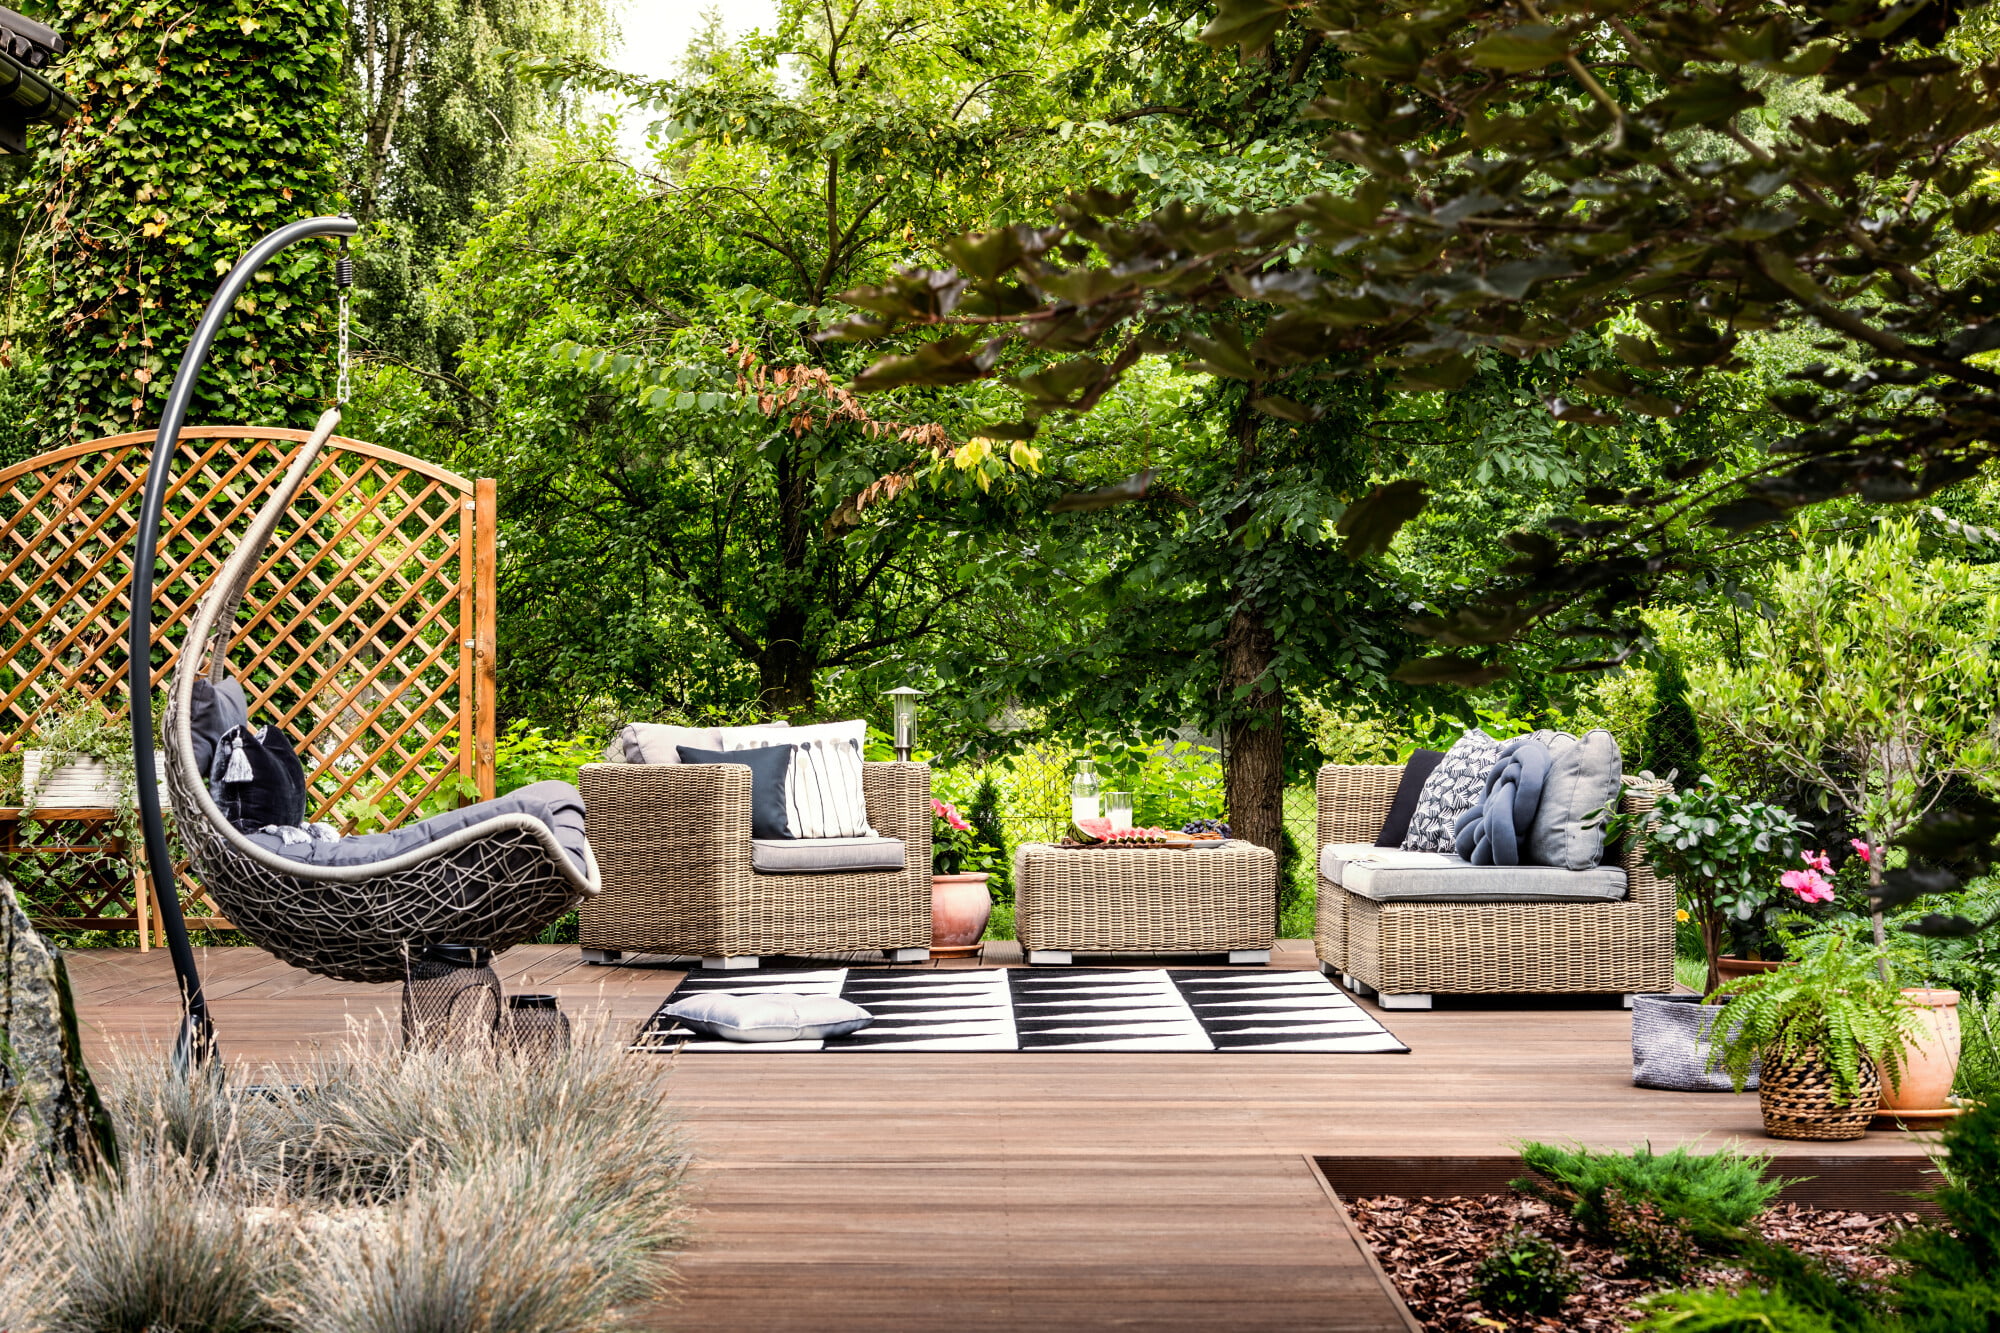 When it comes to patio installation, you should know the prices you can expect to pay. Luckily, this guide has you covered.